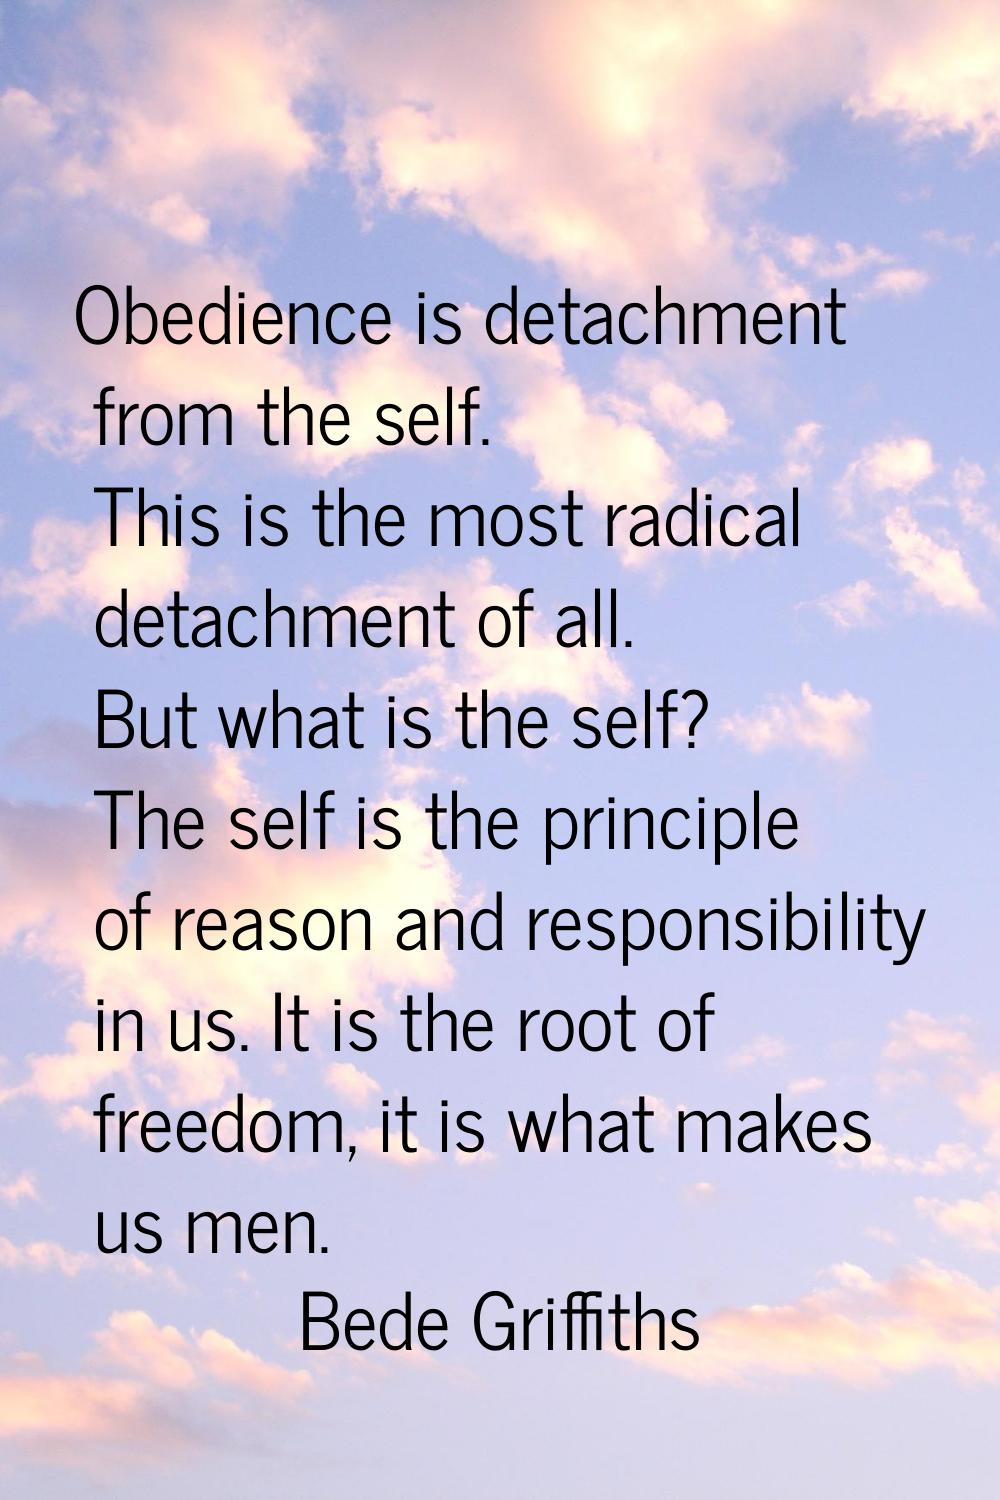 Obedience is detachment from the self. This is the most radical detachment of all. But what is the 